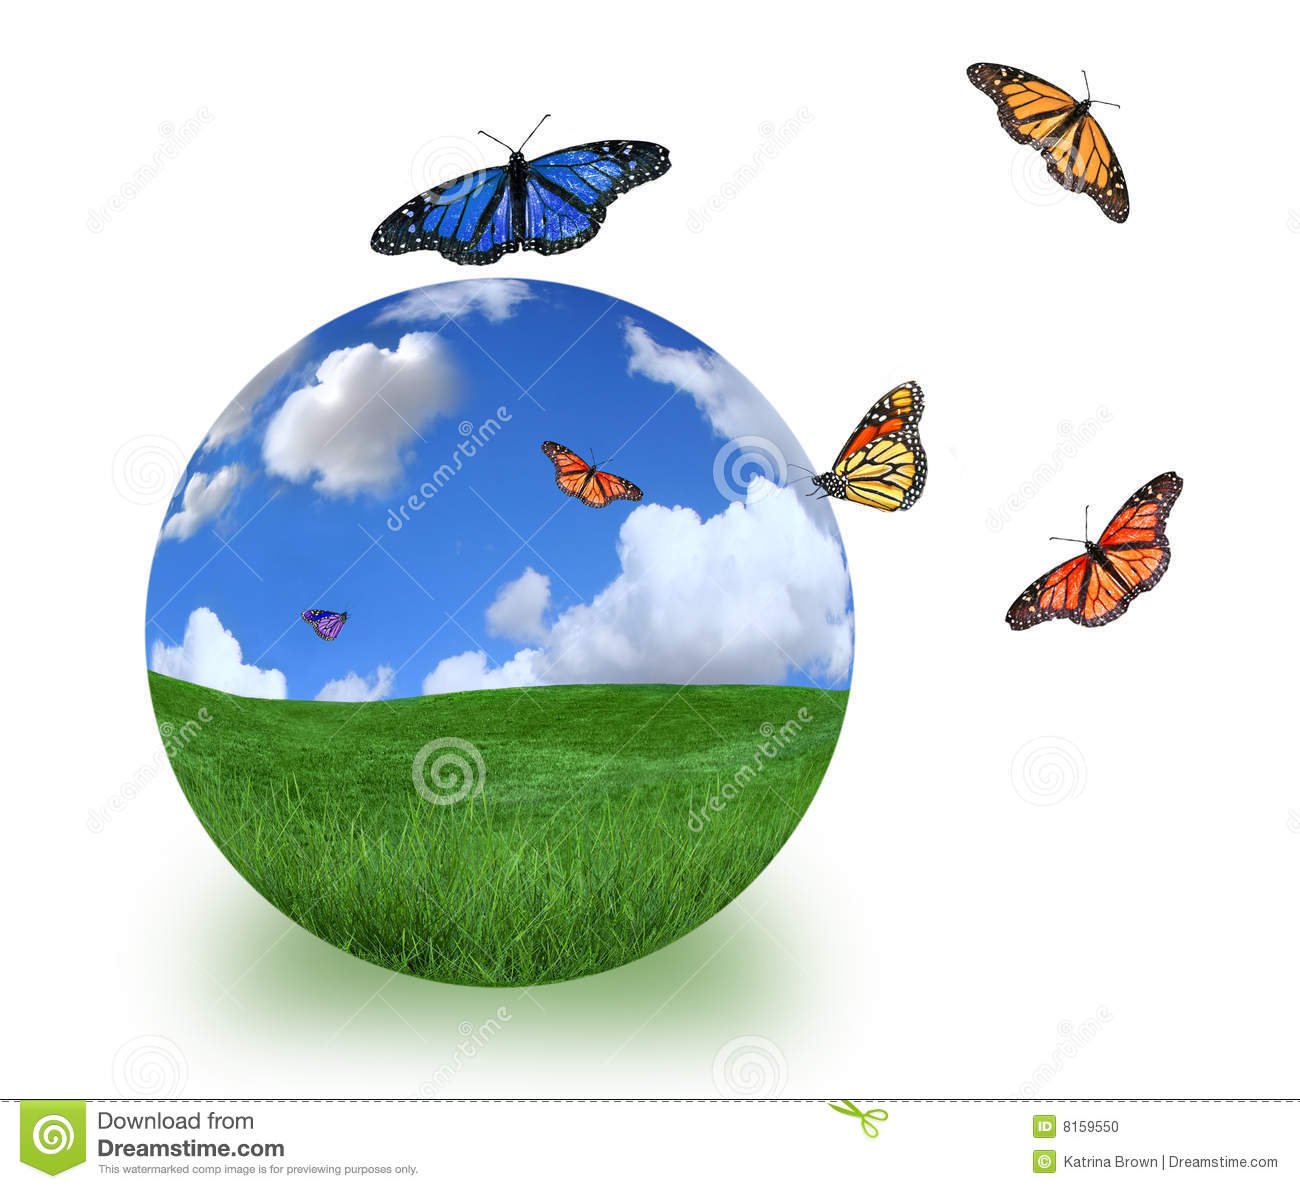 Bright Future Of The Planet Stock Photo   Image  8159550